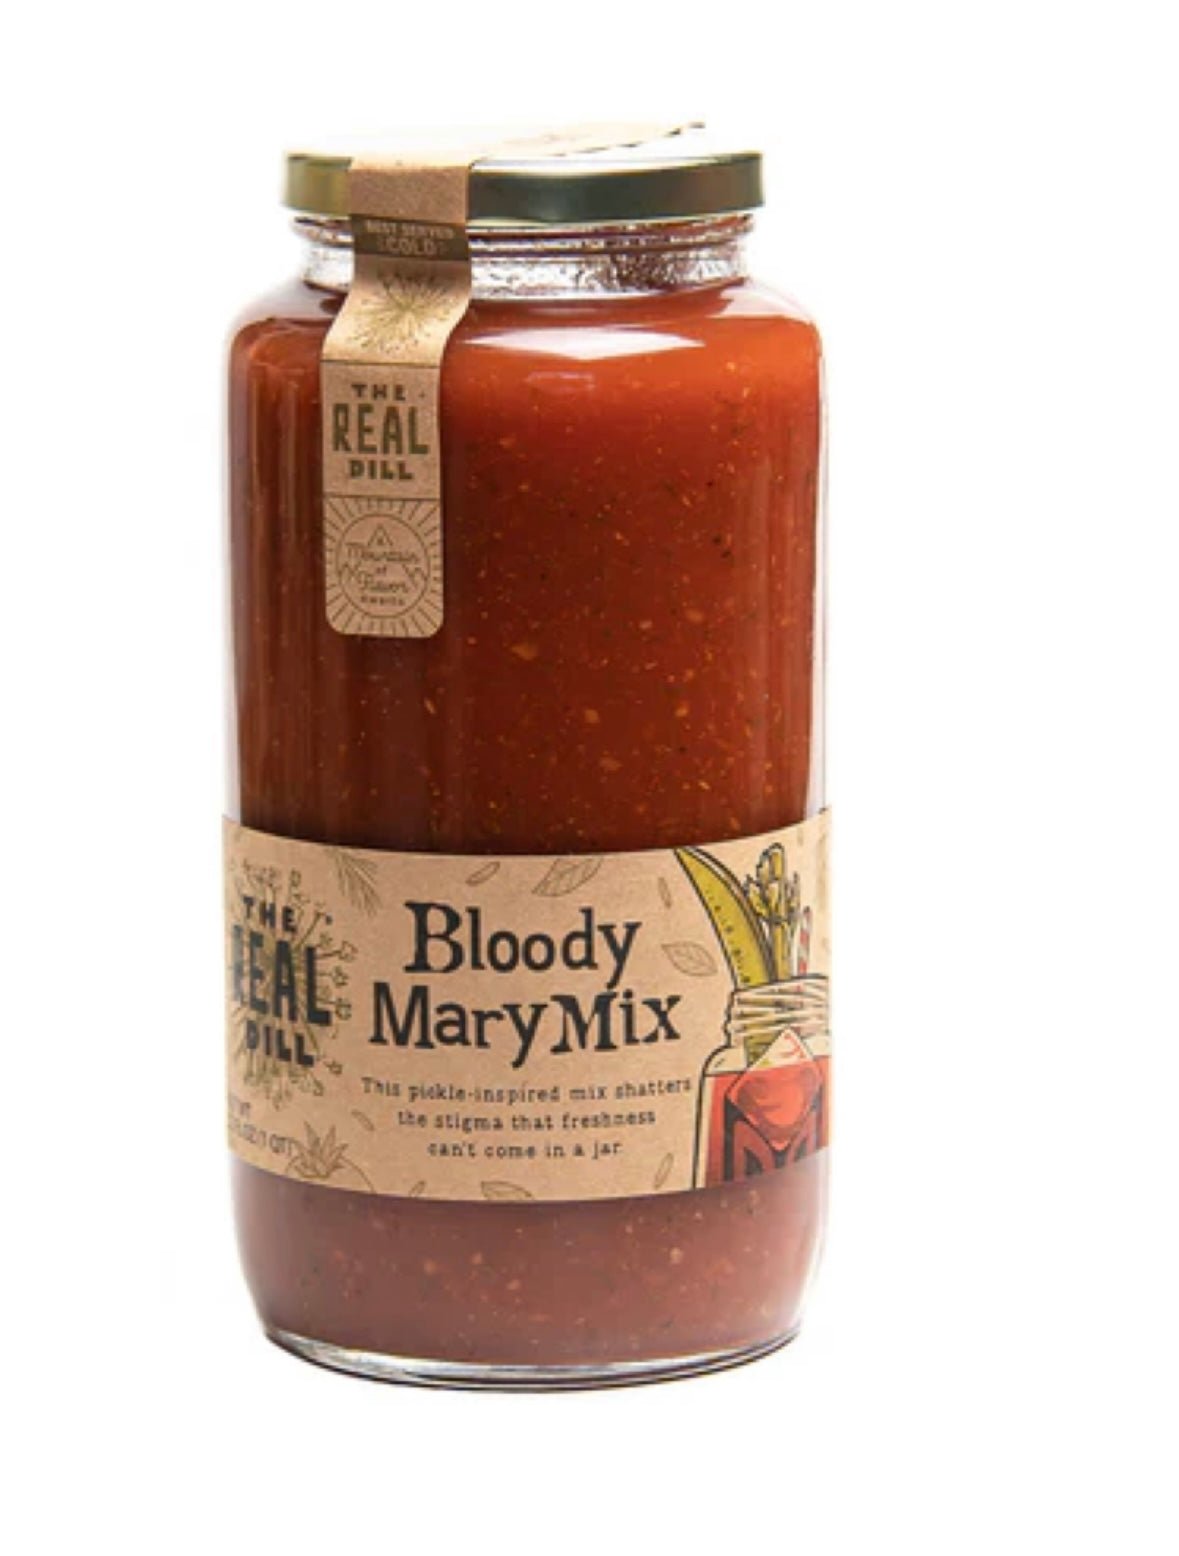 The real dill bloody Mary mix